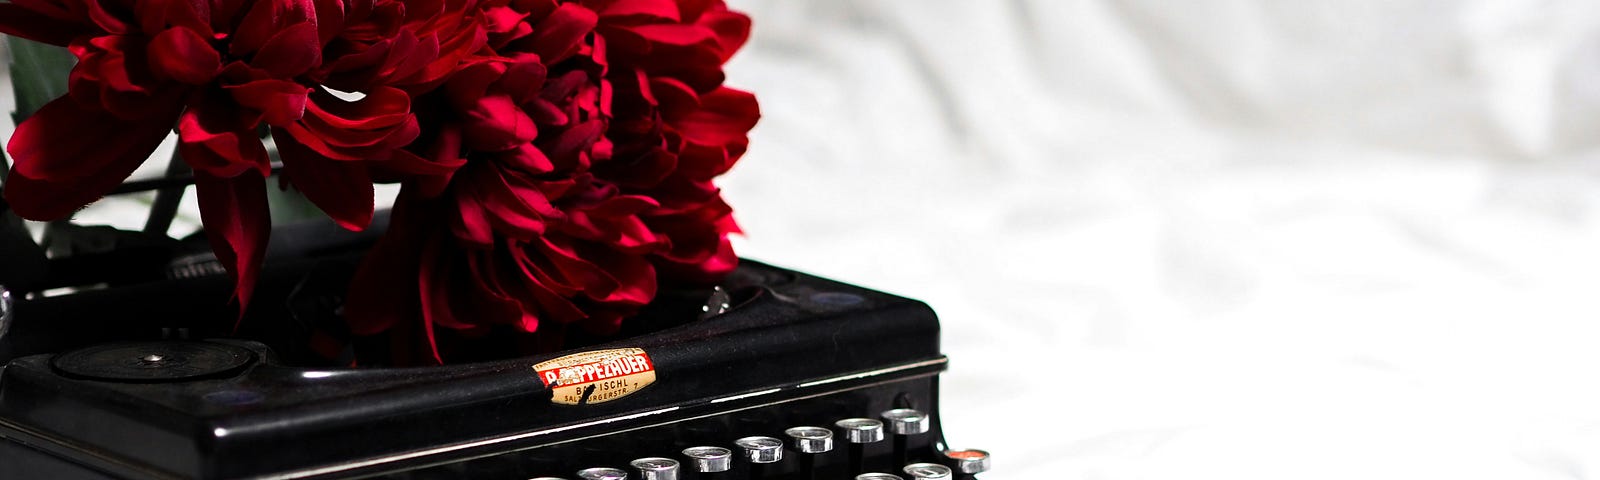 antique typewriter with flowers on top